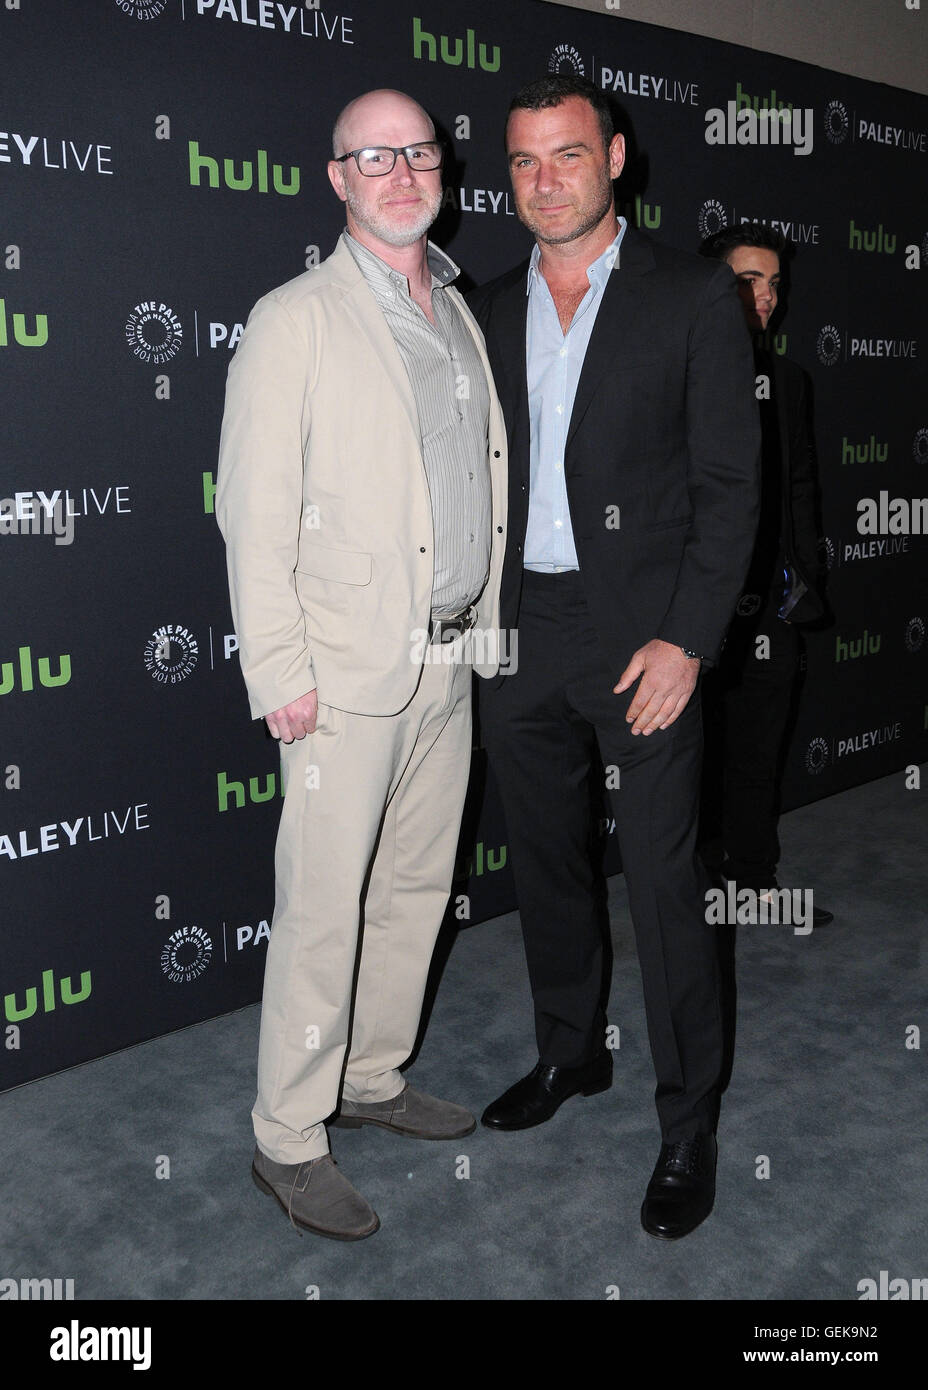 Beverly Hills, CA, USA. 26th July, 2016. 26 July 2016 - Beverly Hills, California. David Hollander, Liev Schreiber. The Paley Center for Media presents PaleyLive LA: An Evening With Ray Donovan held at the Paley Center for Media. Photo Credit: Birdie Thompson/AdMedia Credit:  Birdie Thompson/AdMedia/ZUMA Wire/Alamy Live News Stock Photo